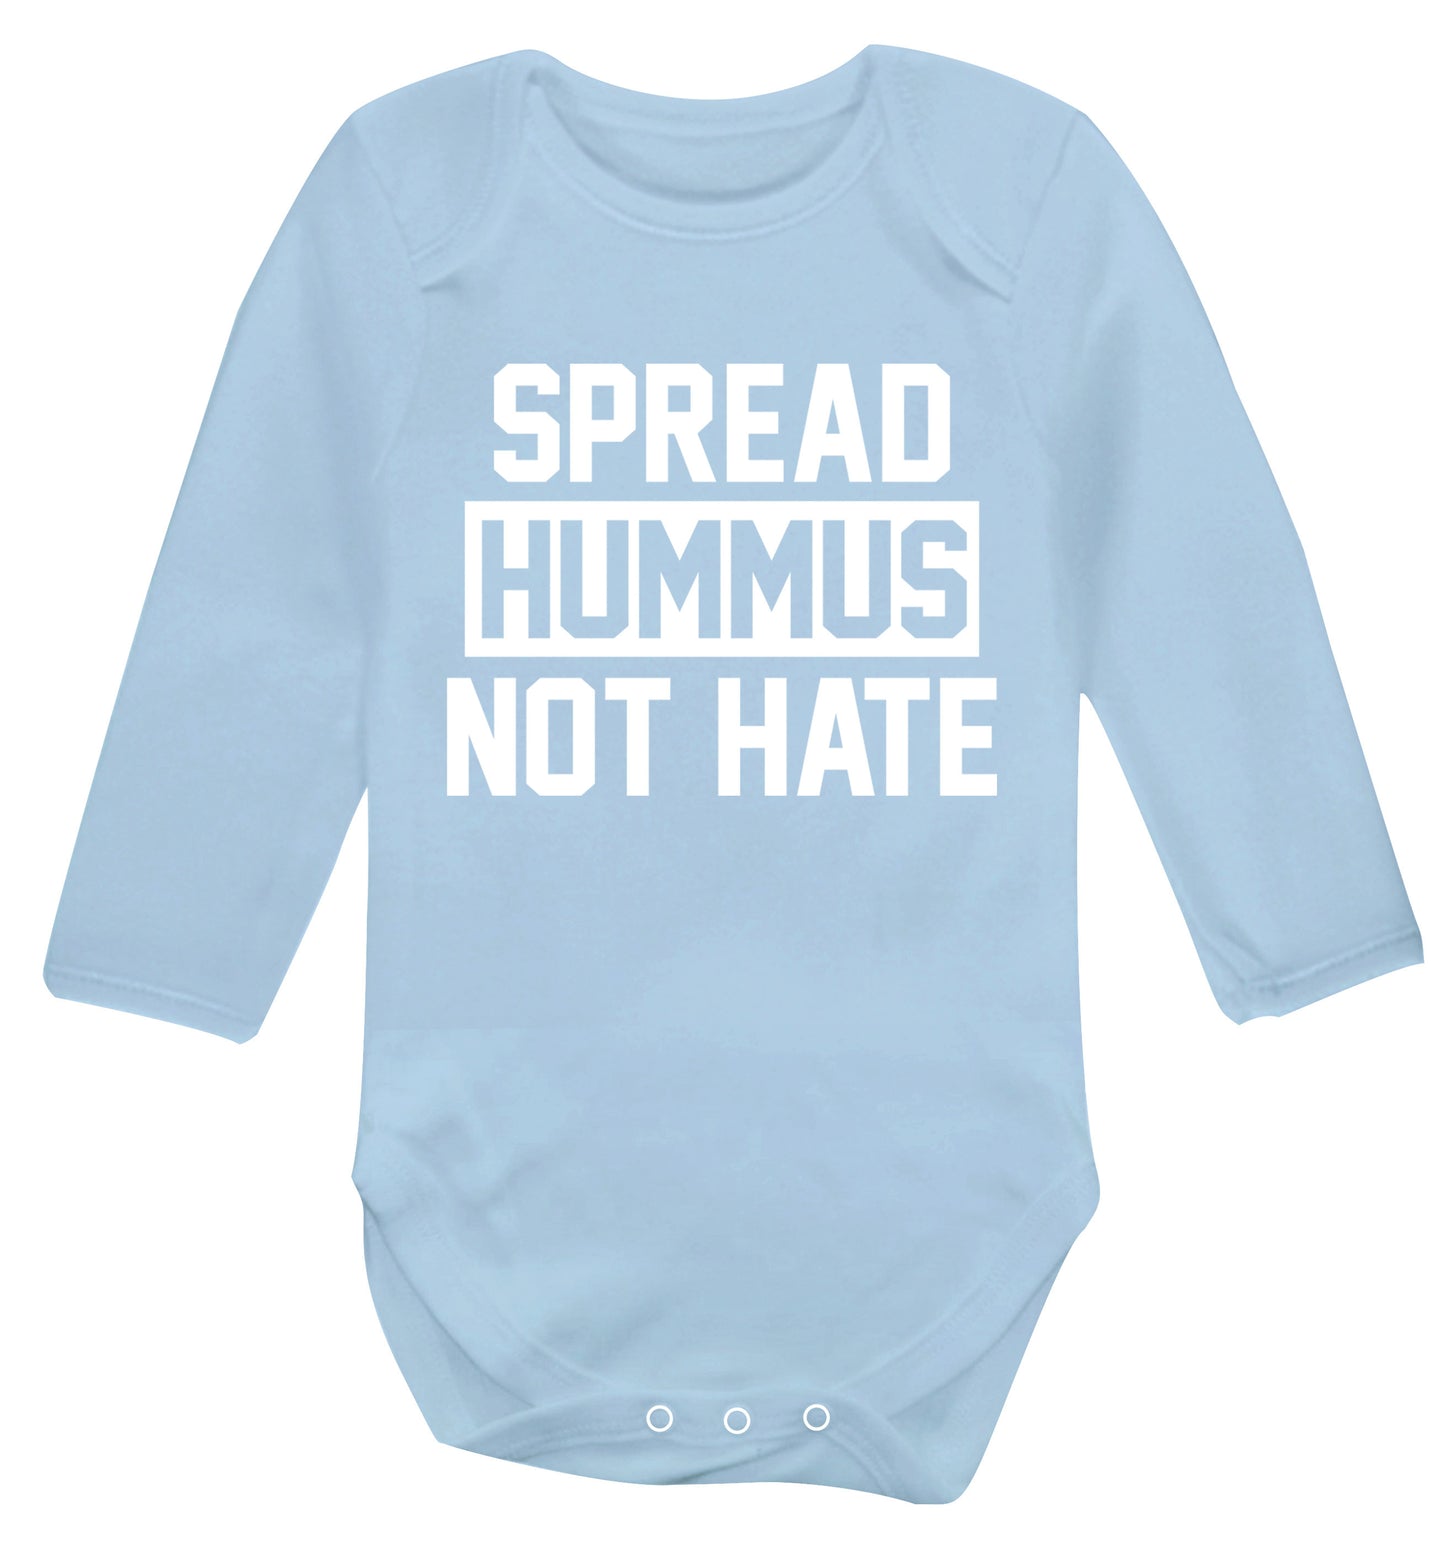 Spread hummus not hate Baby Vest long sleeved pale blue 6-12 months